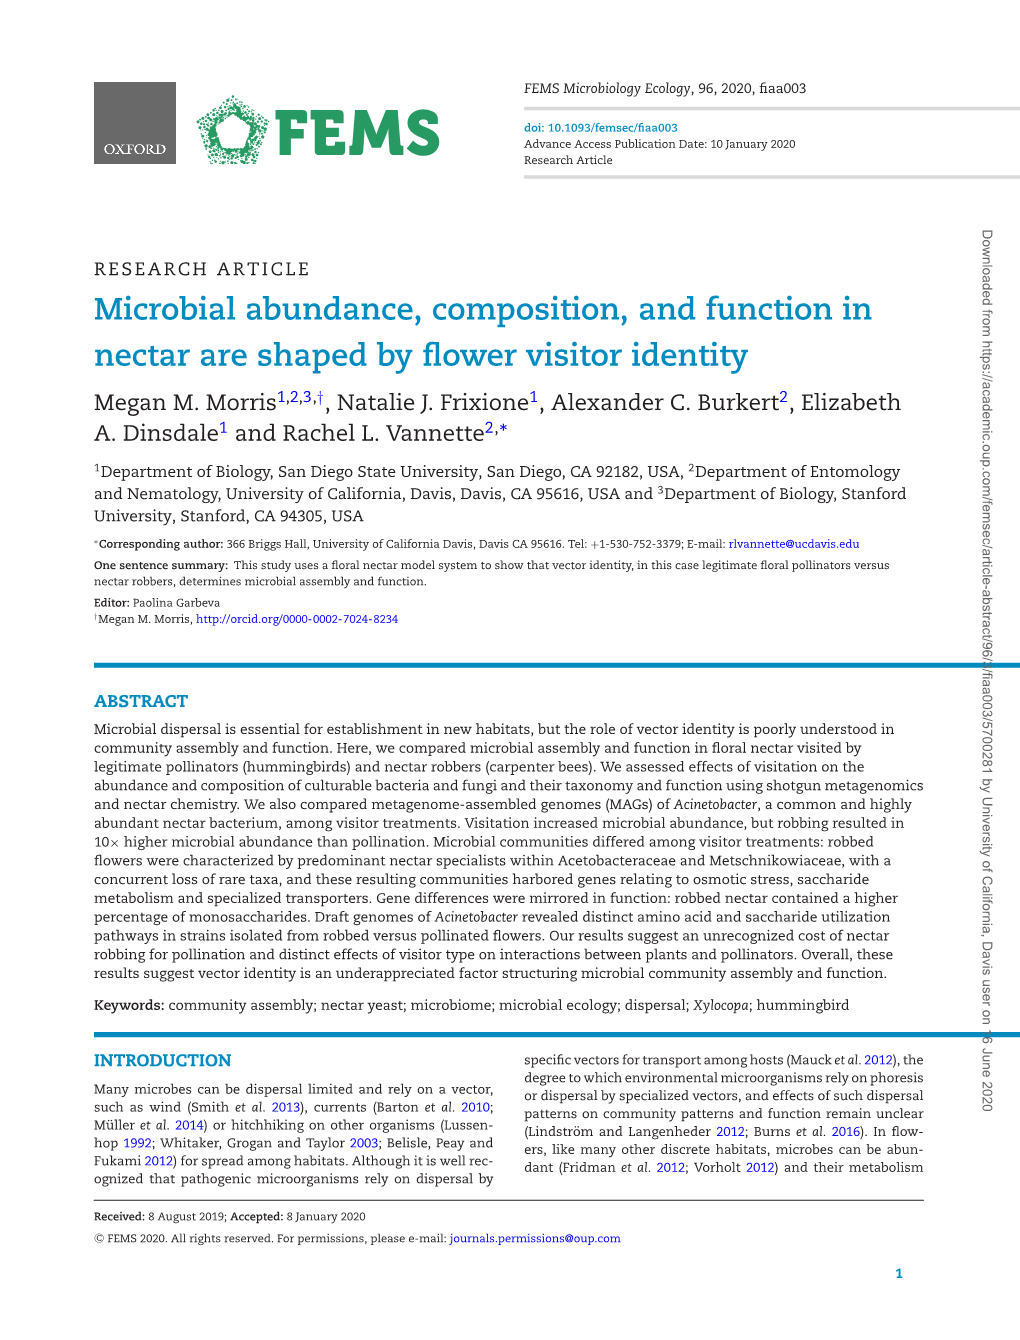 Microbial Abundance, Composition, and Function in Nectar Are Shaped by Flower Visitor Identity Megan M